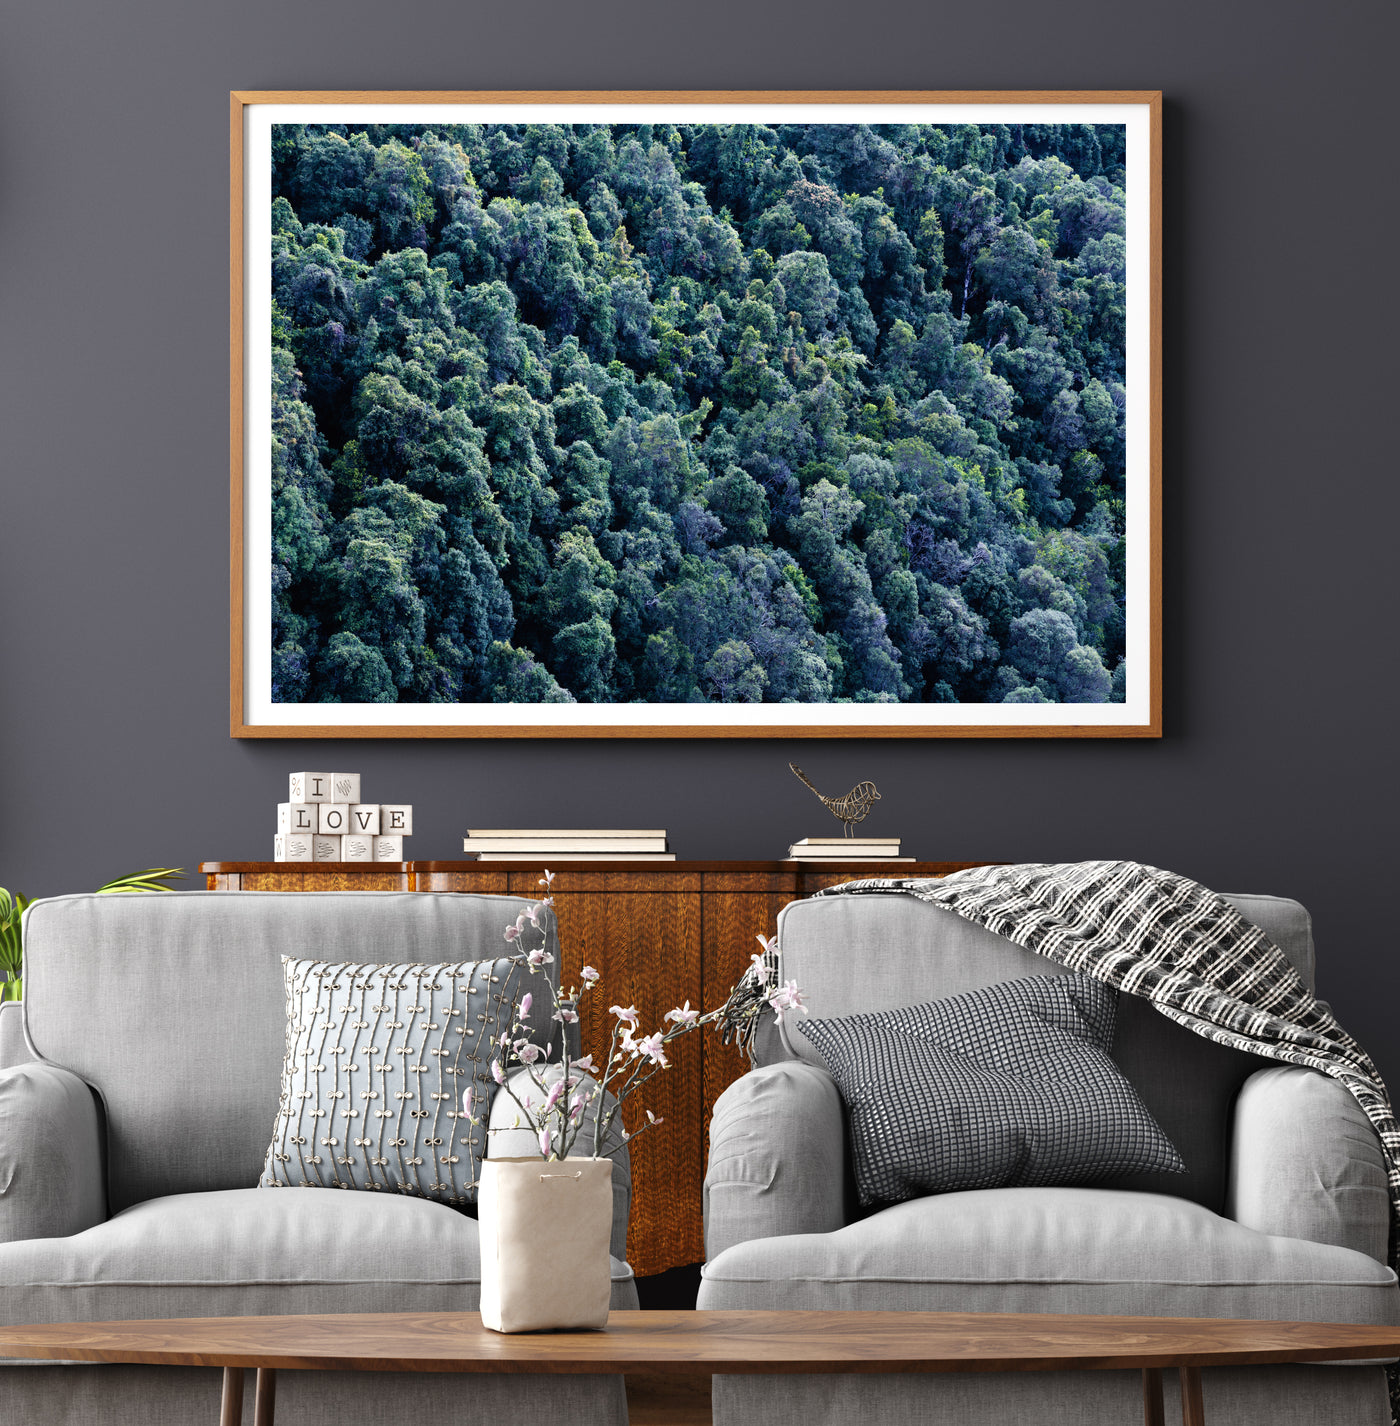 extra large forst wall art print, nature canvas prints for modern living room | arrtopia 